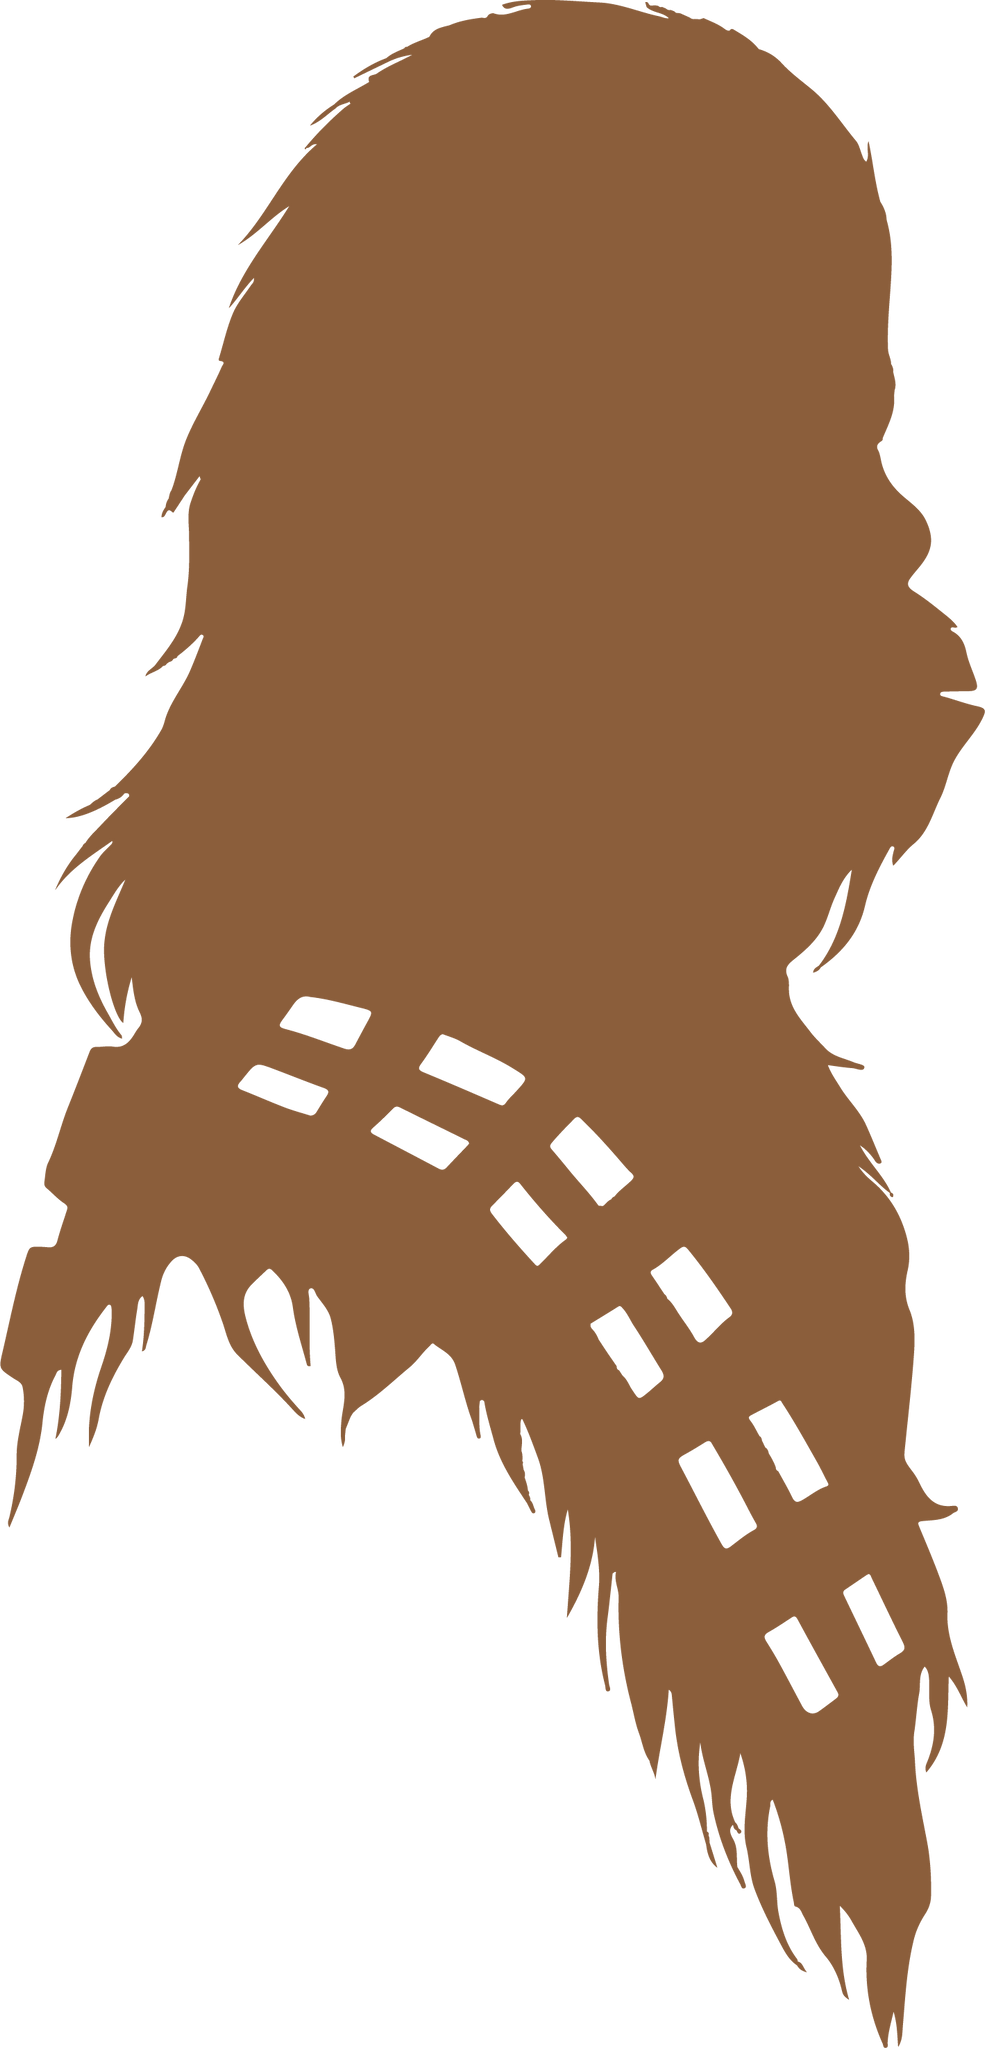 Download Chewbacca Silhouette Star Wars Svg Dxf Eps Png Cut File Cricut And Paper Pi